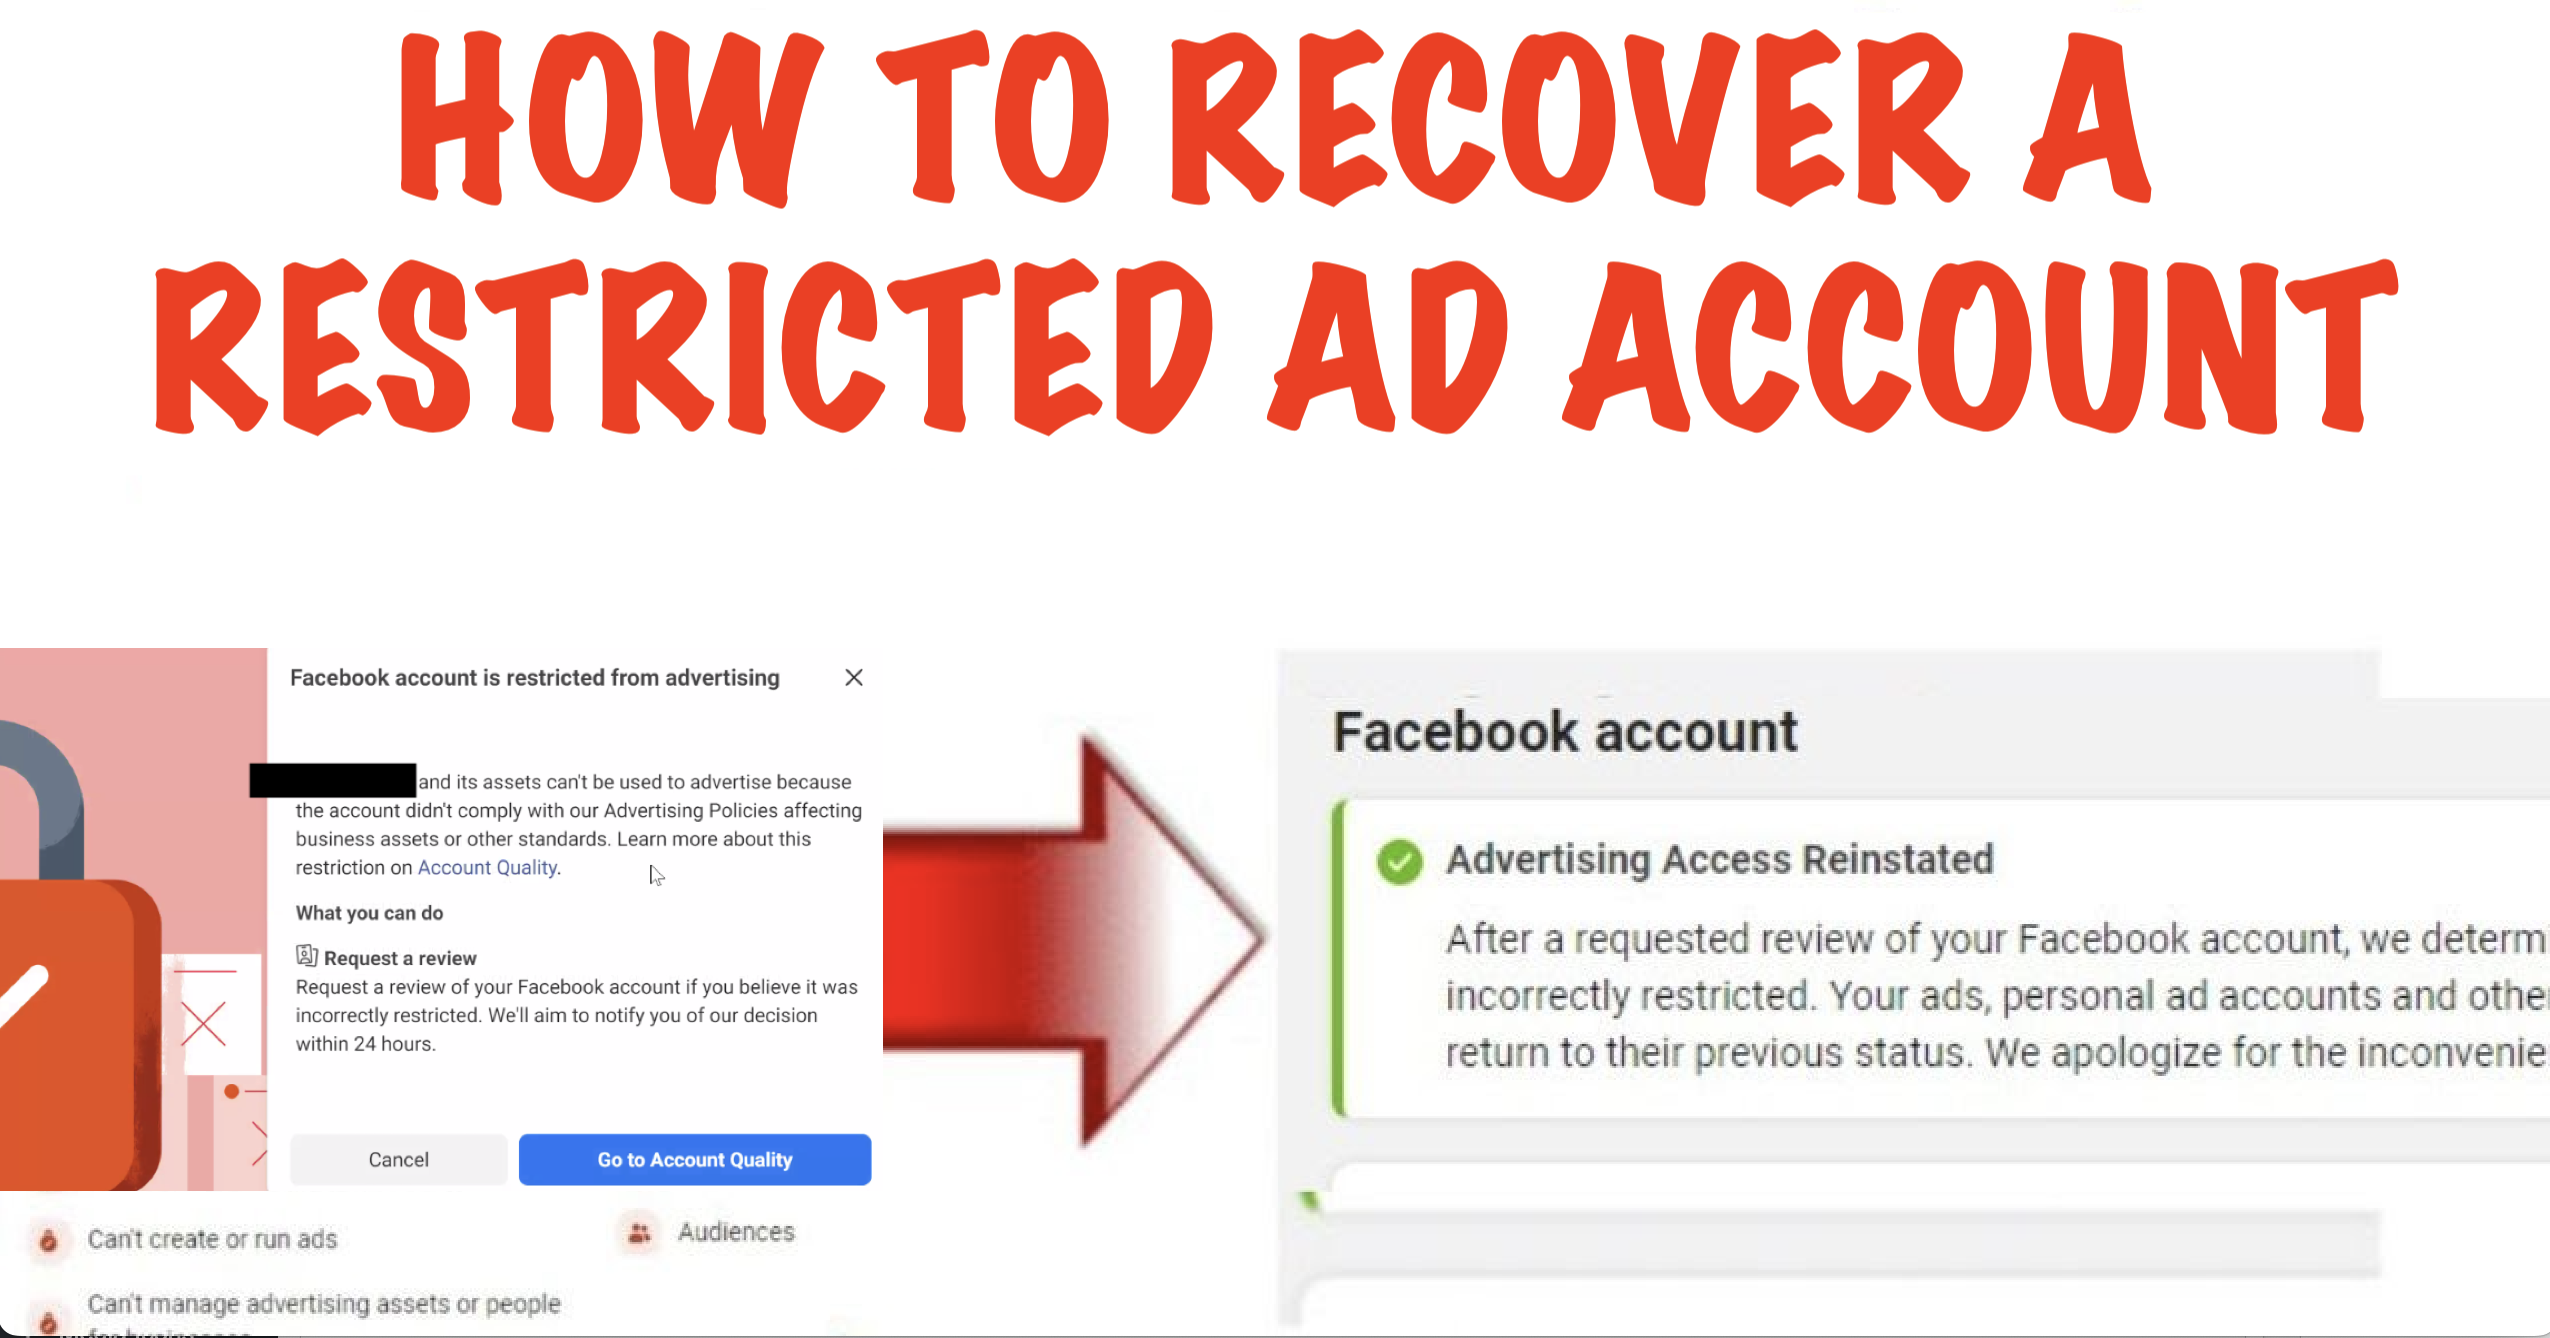 HOW TO RECOVER A RESTRICTED AD ACCOUNT